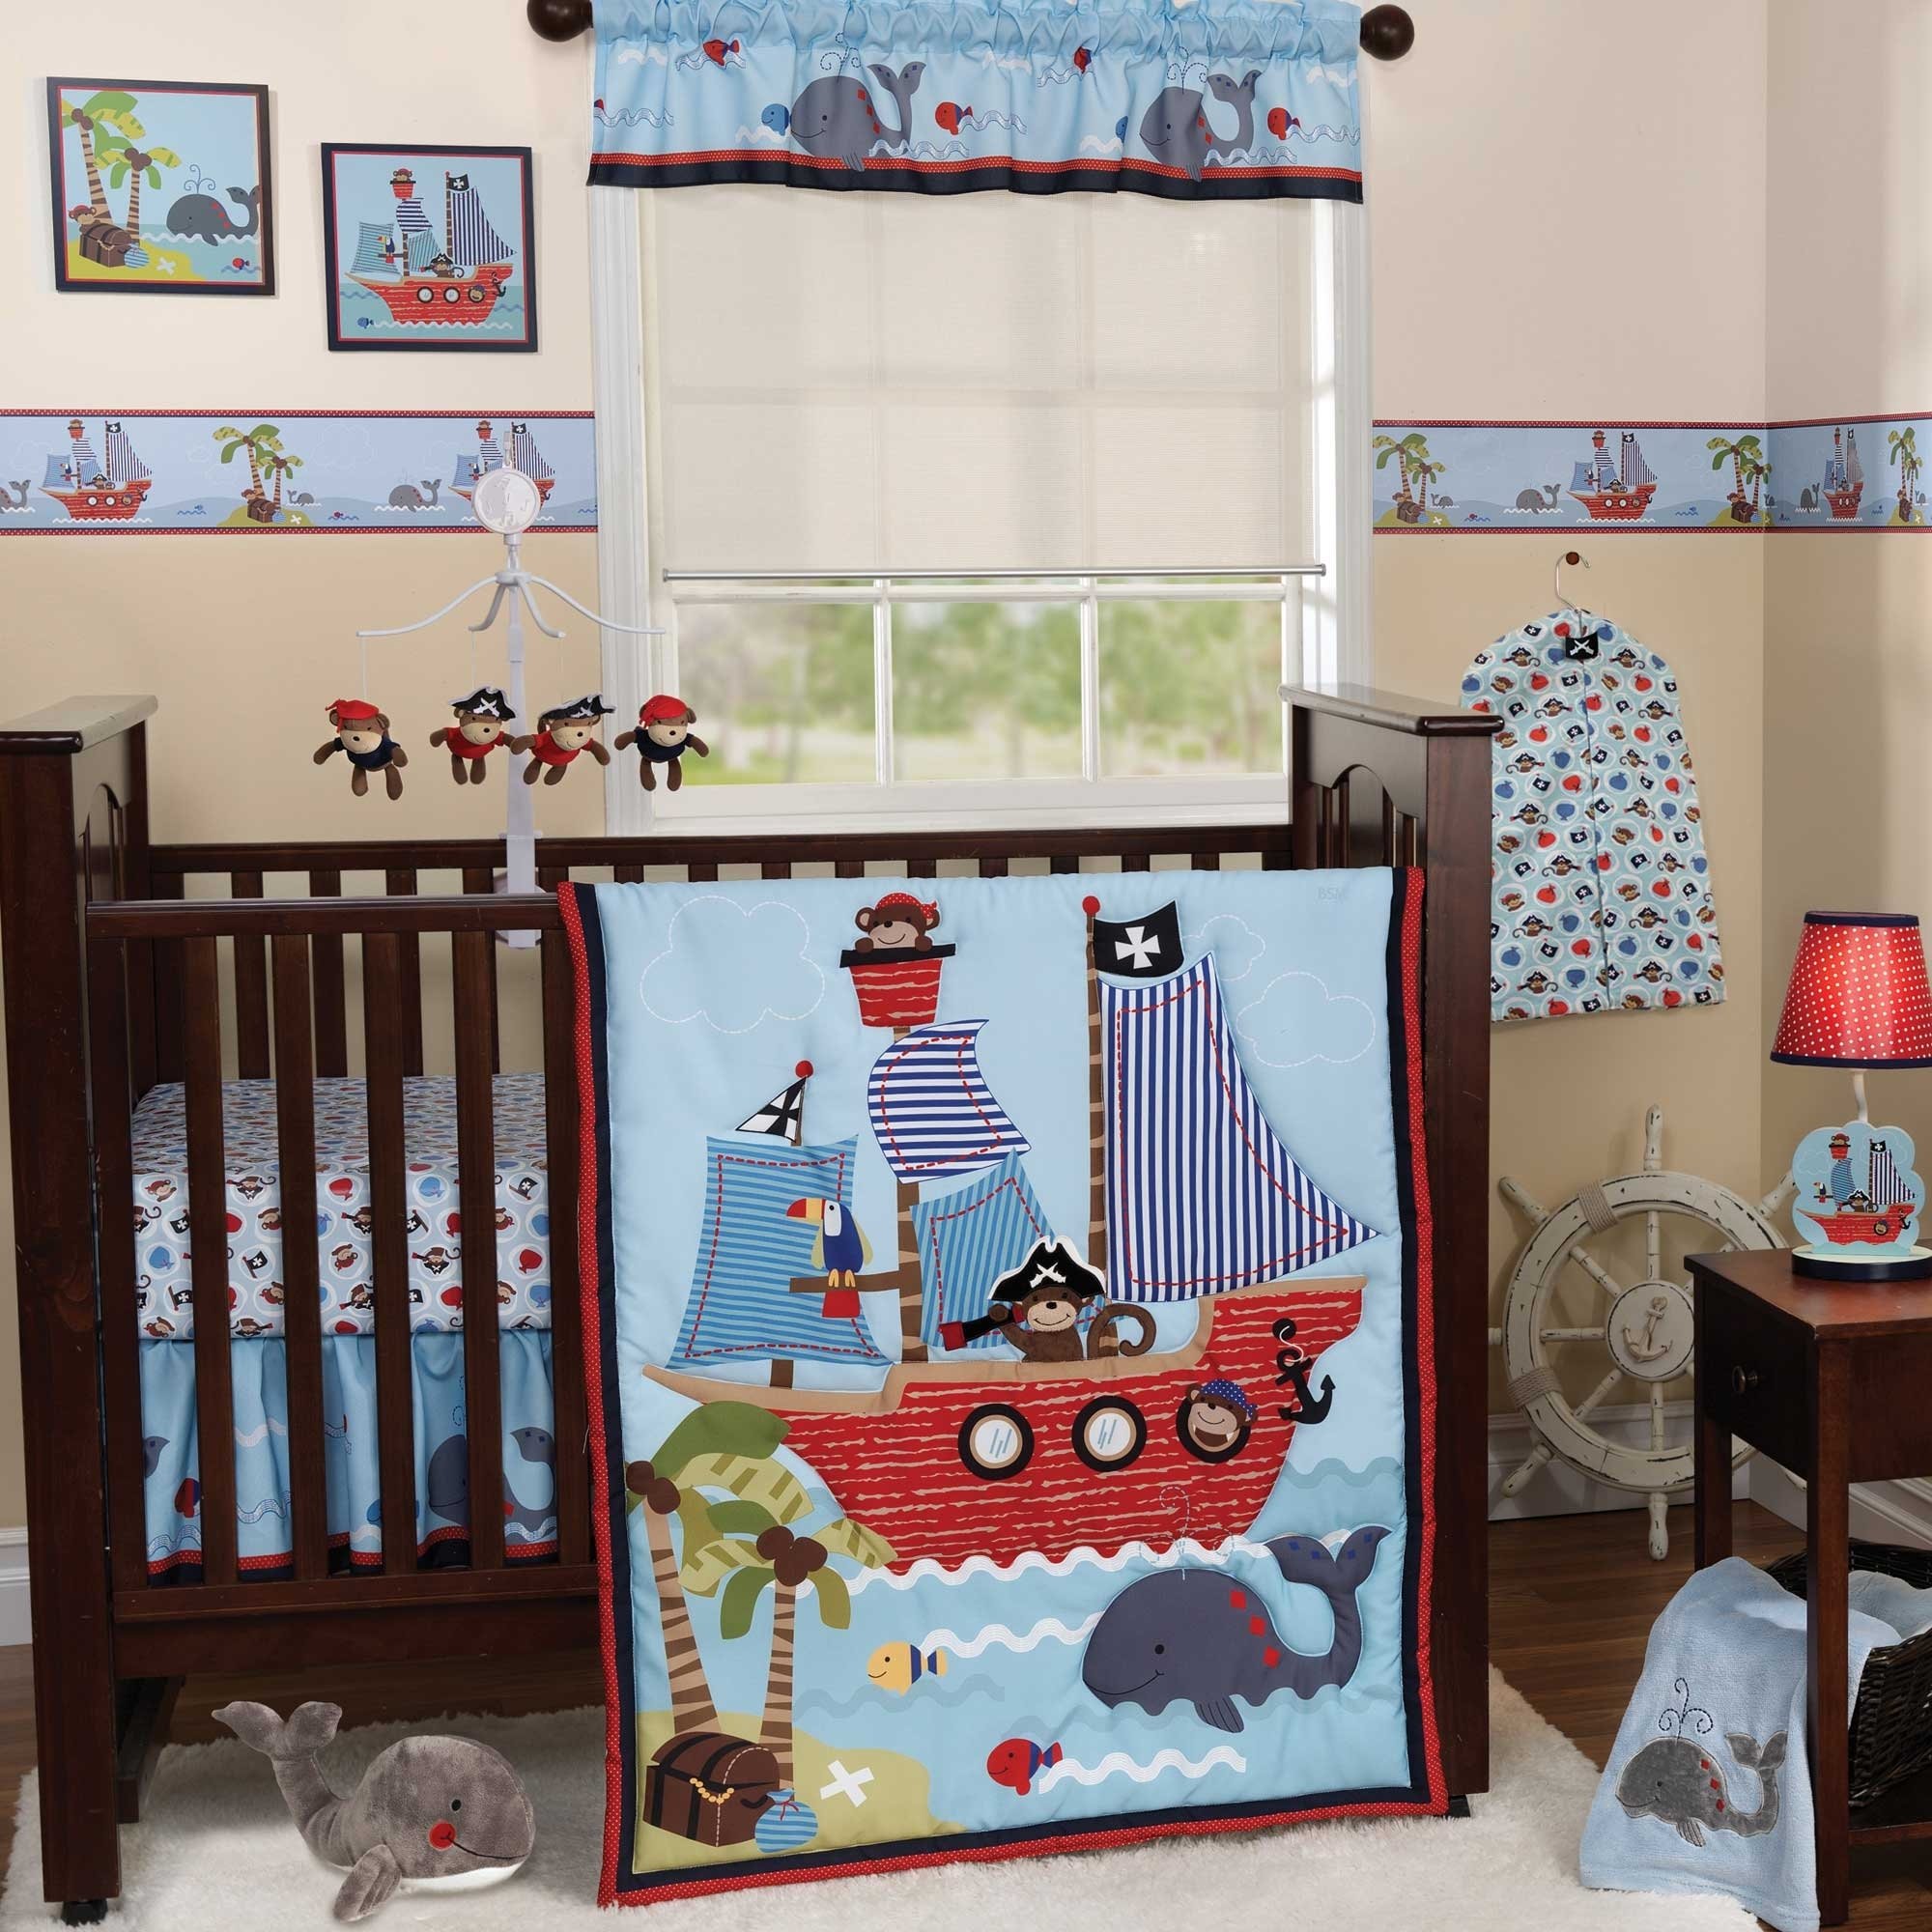 10 Great Baby Boy Nursery Theme Ideas bedroom baby boy theme rooms design decoration also bedroom cool 2022